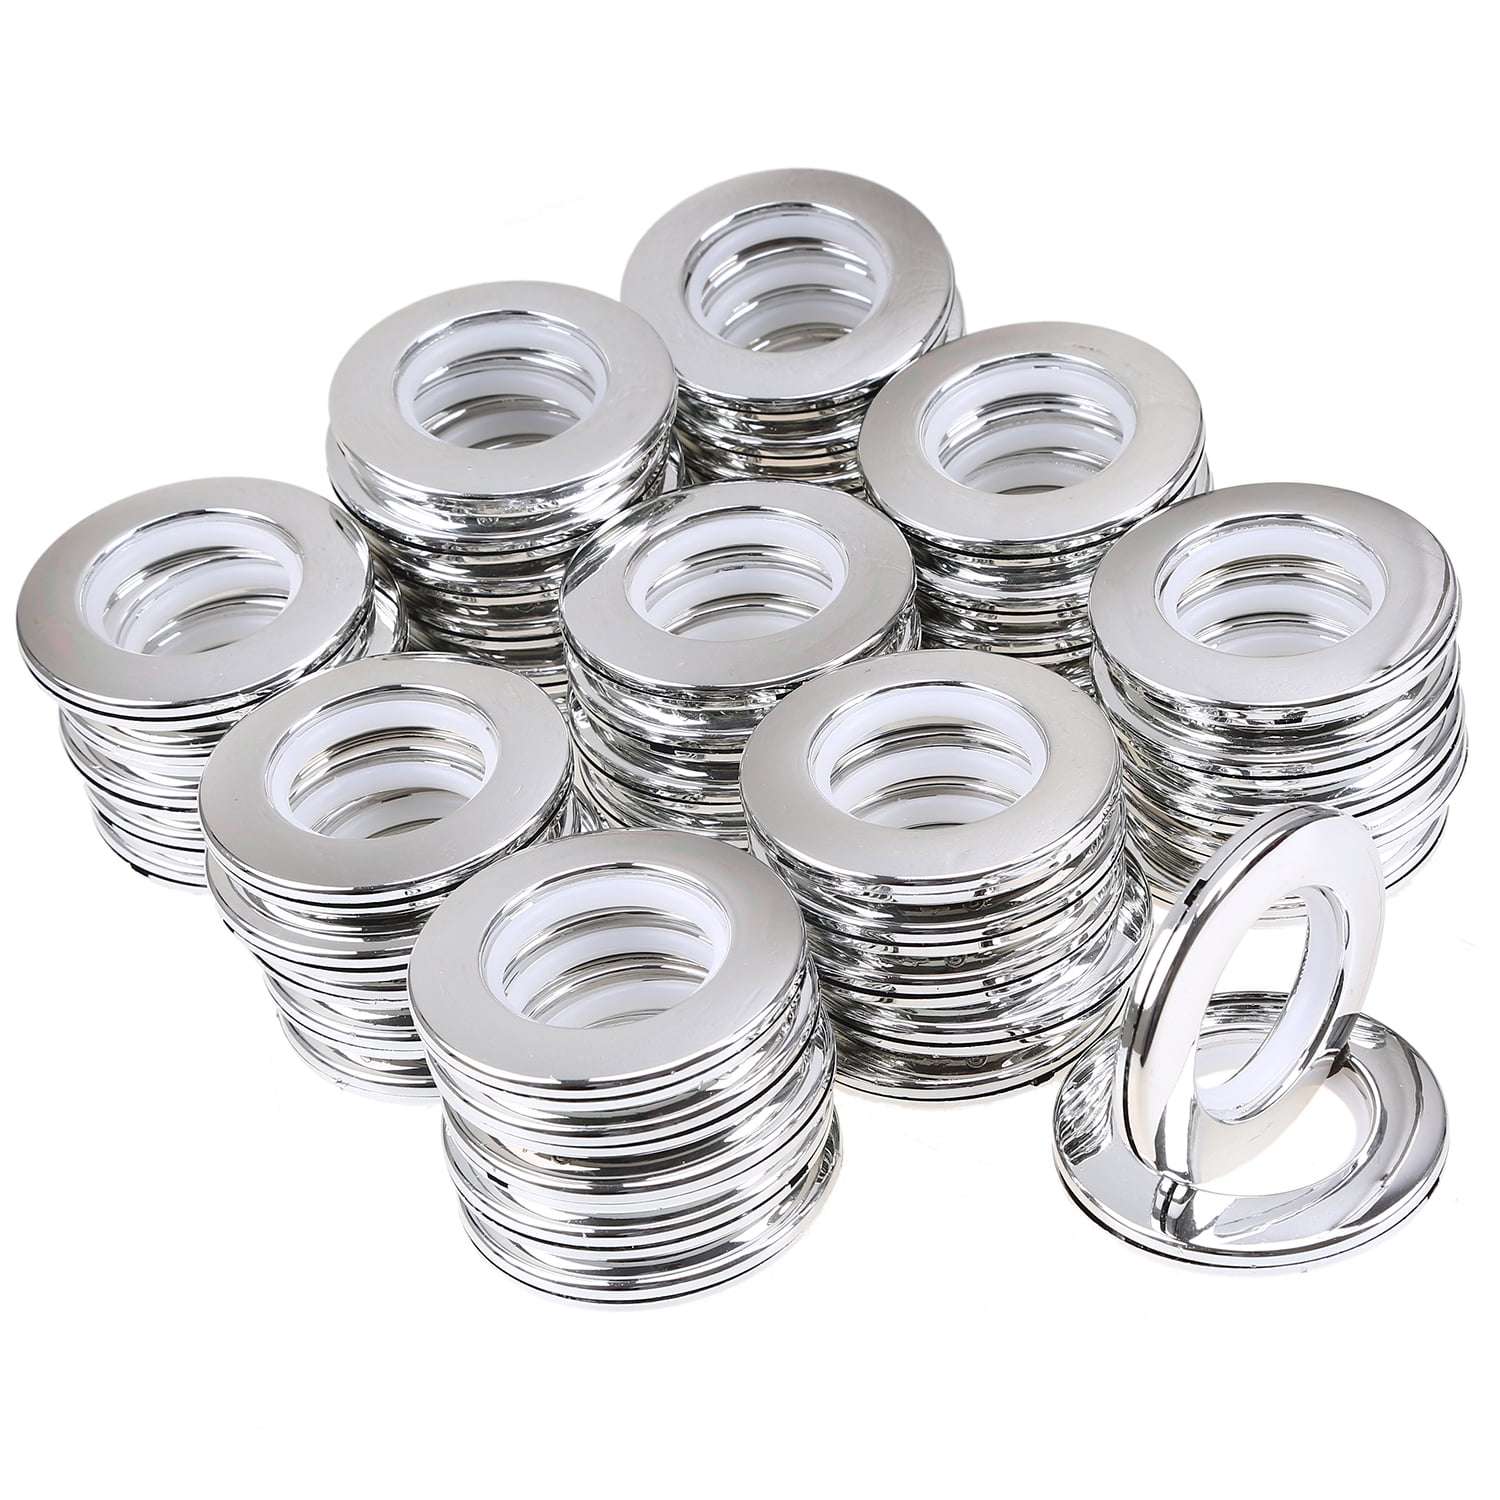  24 Pieces Curtain Grommets Low Noise Roman Rings 1-9/16 Inch  Curtain Hole Ring Curtain Eyelet Rings, Matt Silver : Home & Kitchen